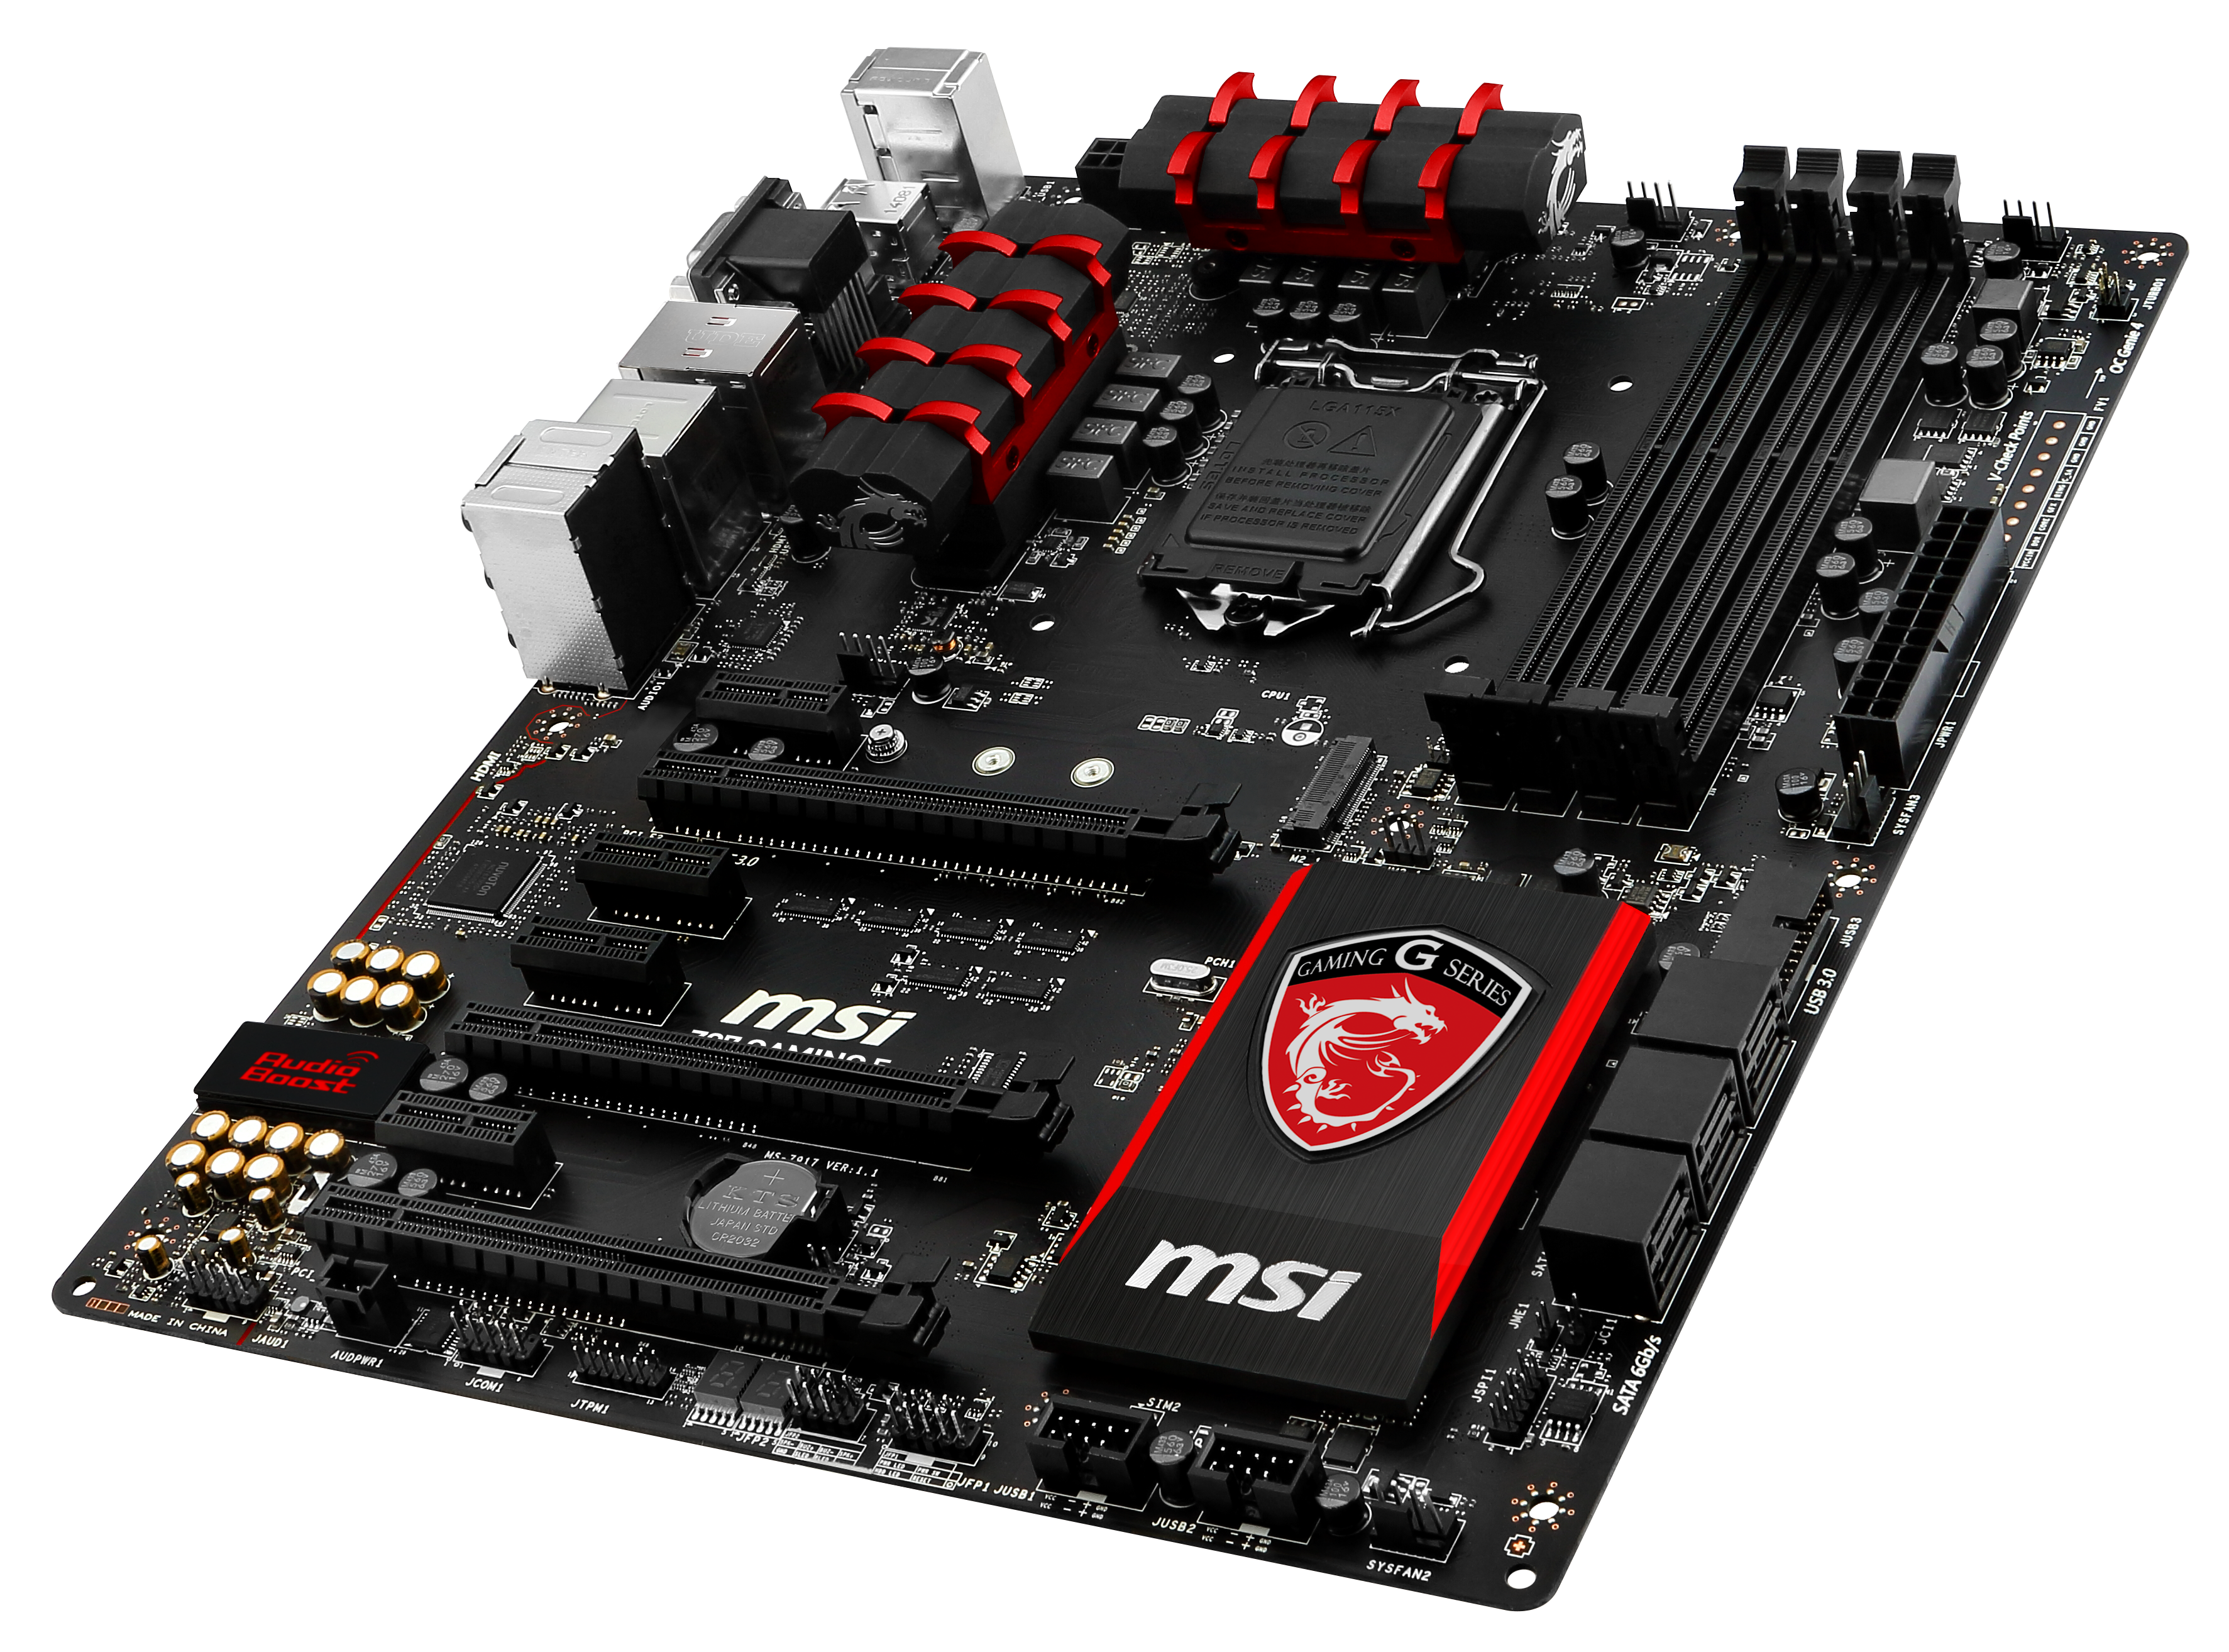 MSI Z97 Gaming 5 Motherboard Review: Five is Alive